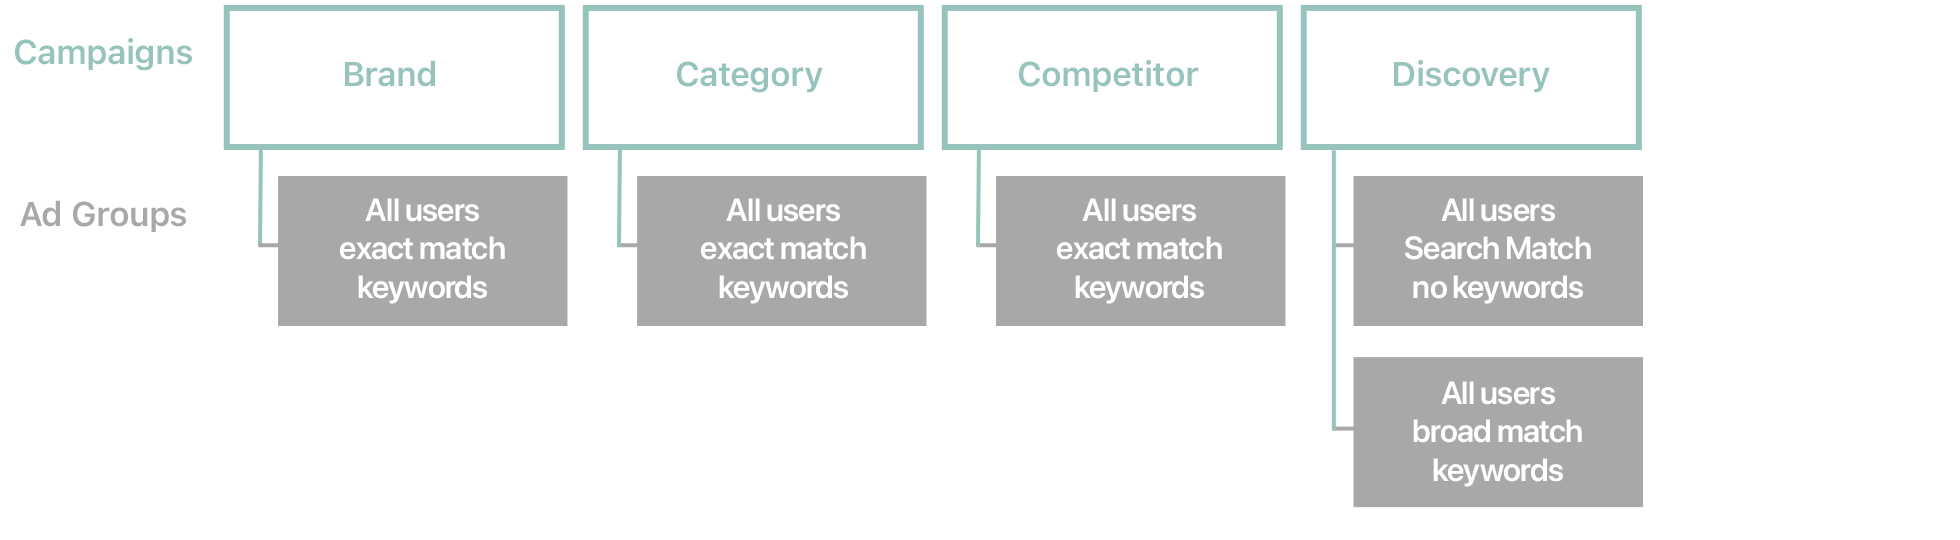 A diagram showing how to structure your ad groups to maximize reach. The first row shows the three campaigns, Brand, Category, and Competitor. They're each set to reach all users with exact match keywords in their ad groups. The last campaign is a Discovery campaign. It has two ad groups both set to reach all users. One ad group has Search Match on and no keywords, and the other contains broad match keywords. 